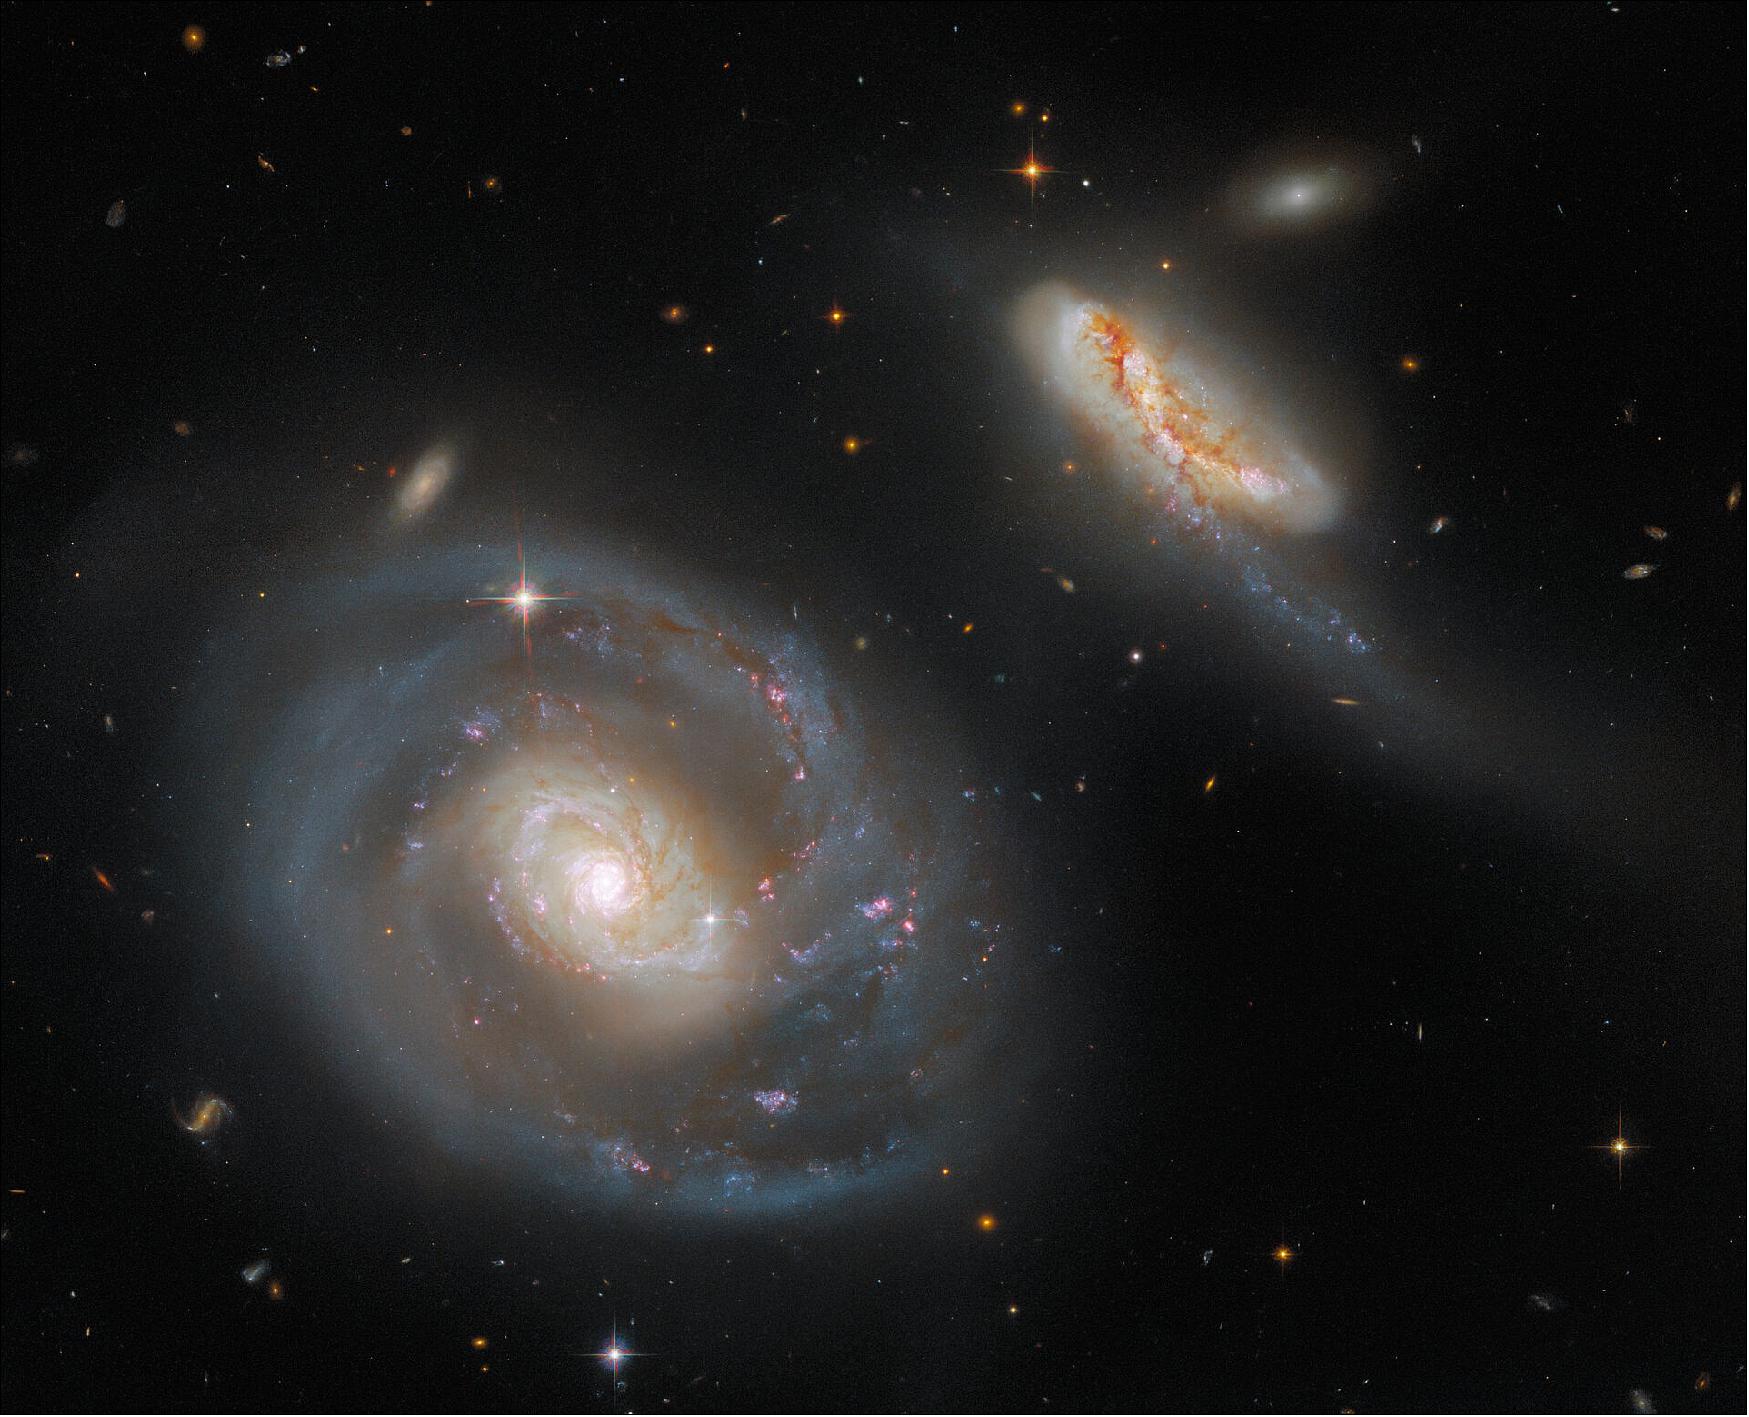 Figure 70: This image of Arp 298 contains data from three separate Hubble proposals. By combining observations from three proposals, Arp 298 is captured in glorious detail in seven different filters from two of Hubble’s instruments — the Wide Field Camera 3 and the Advanced Camera for Surveys (image credit: ESA/Hubble & NASA, A. Evans, R. Chandar; CC BY 4.0)